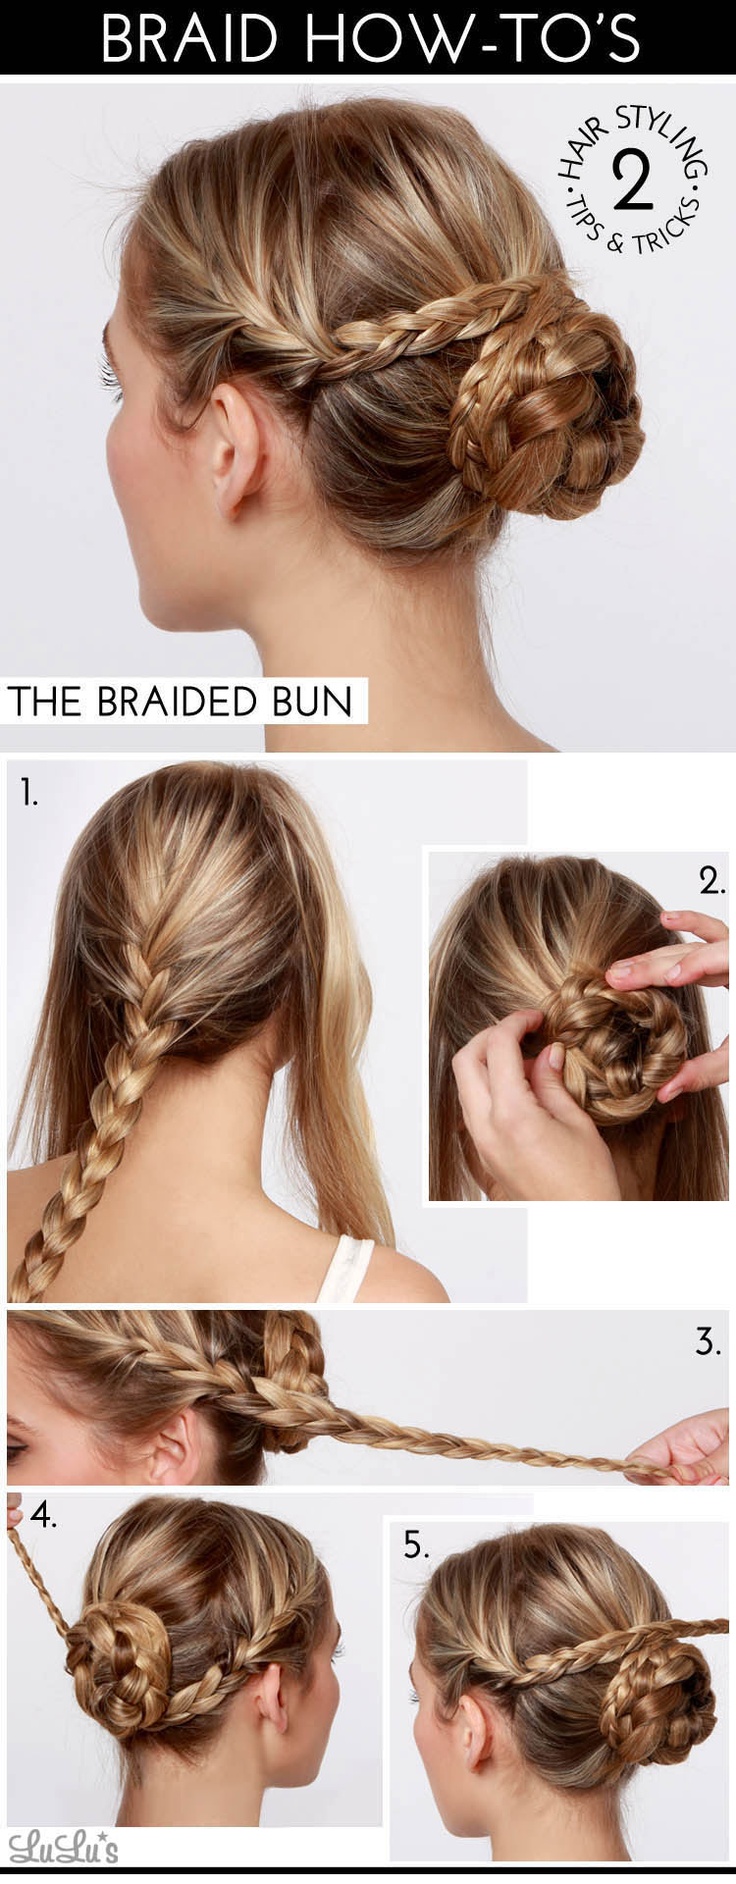 Braided Bun â€" Hair Style For A Special Event Or Holiday